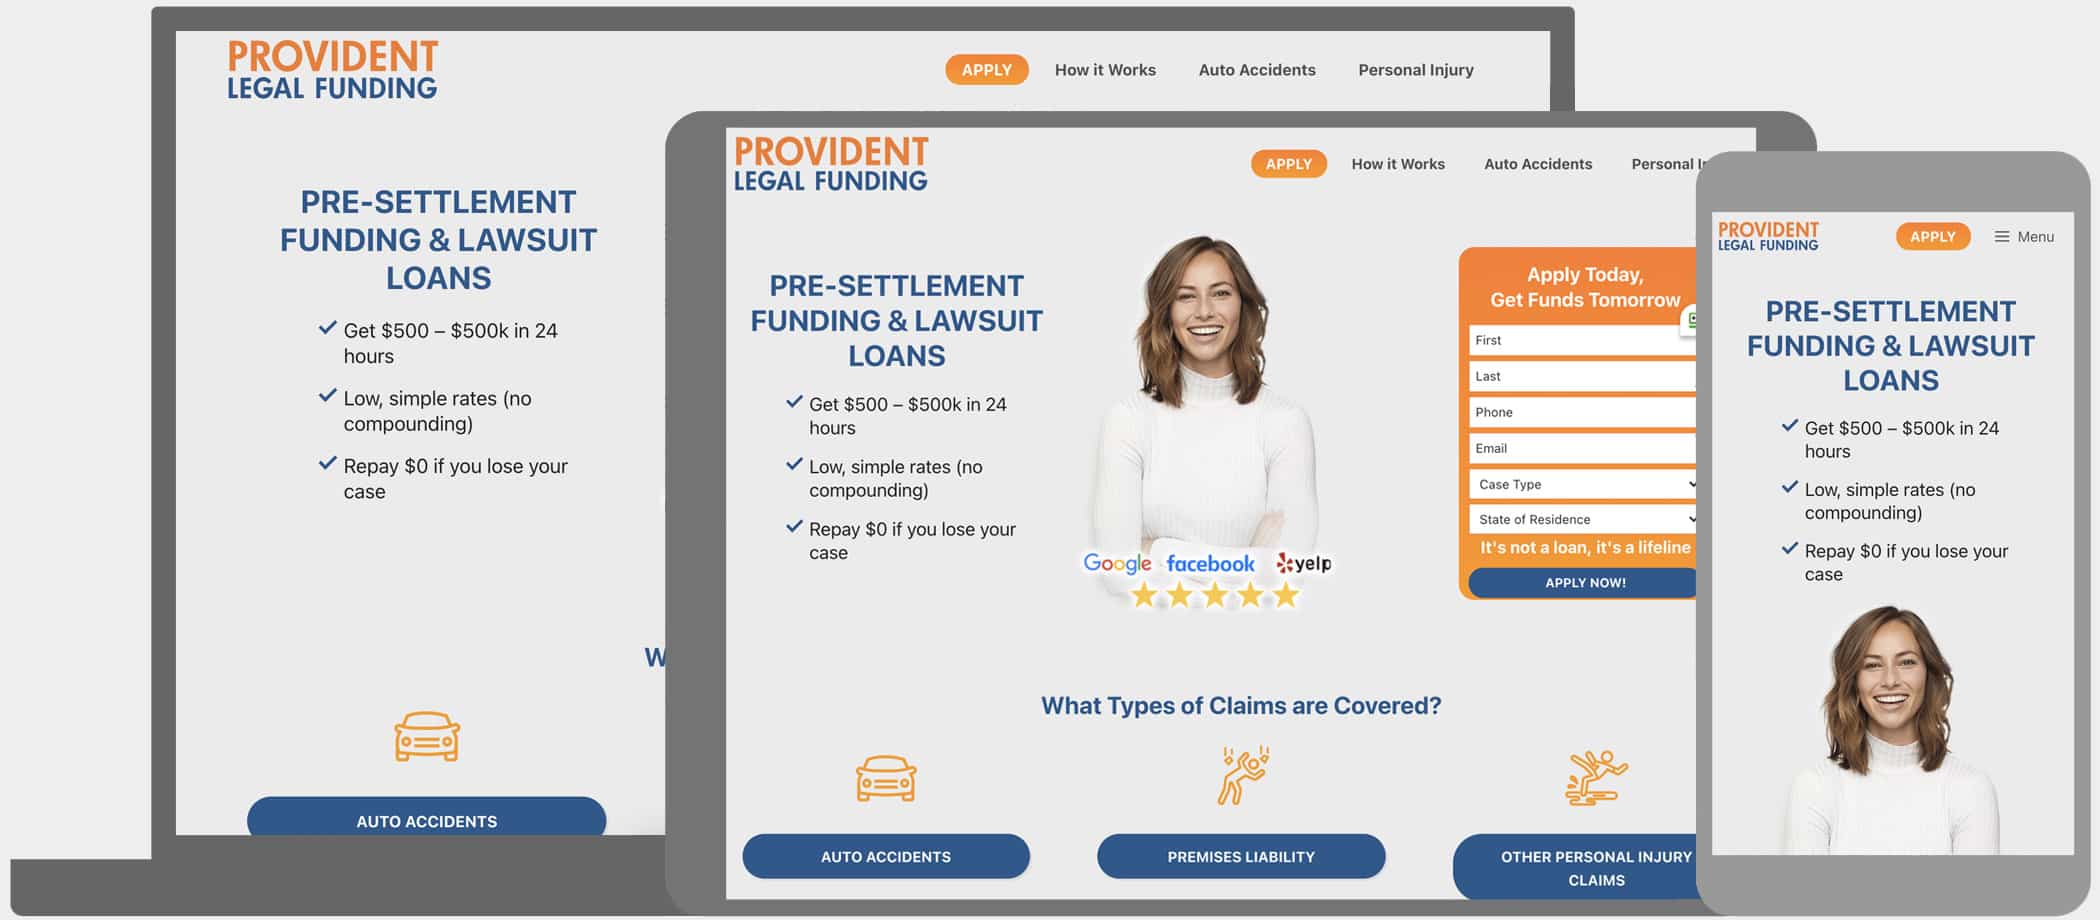 Provident Legal Funding: SEO friendly design featuring responsive site